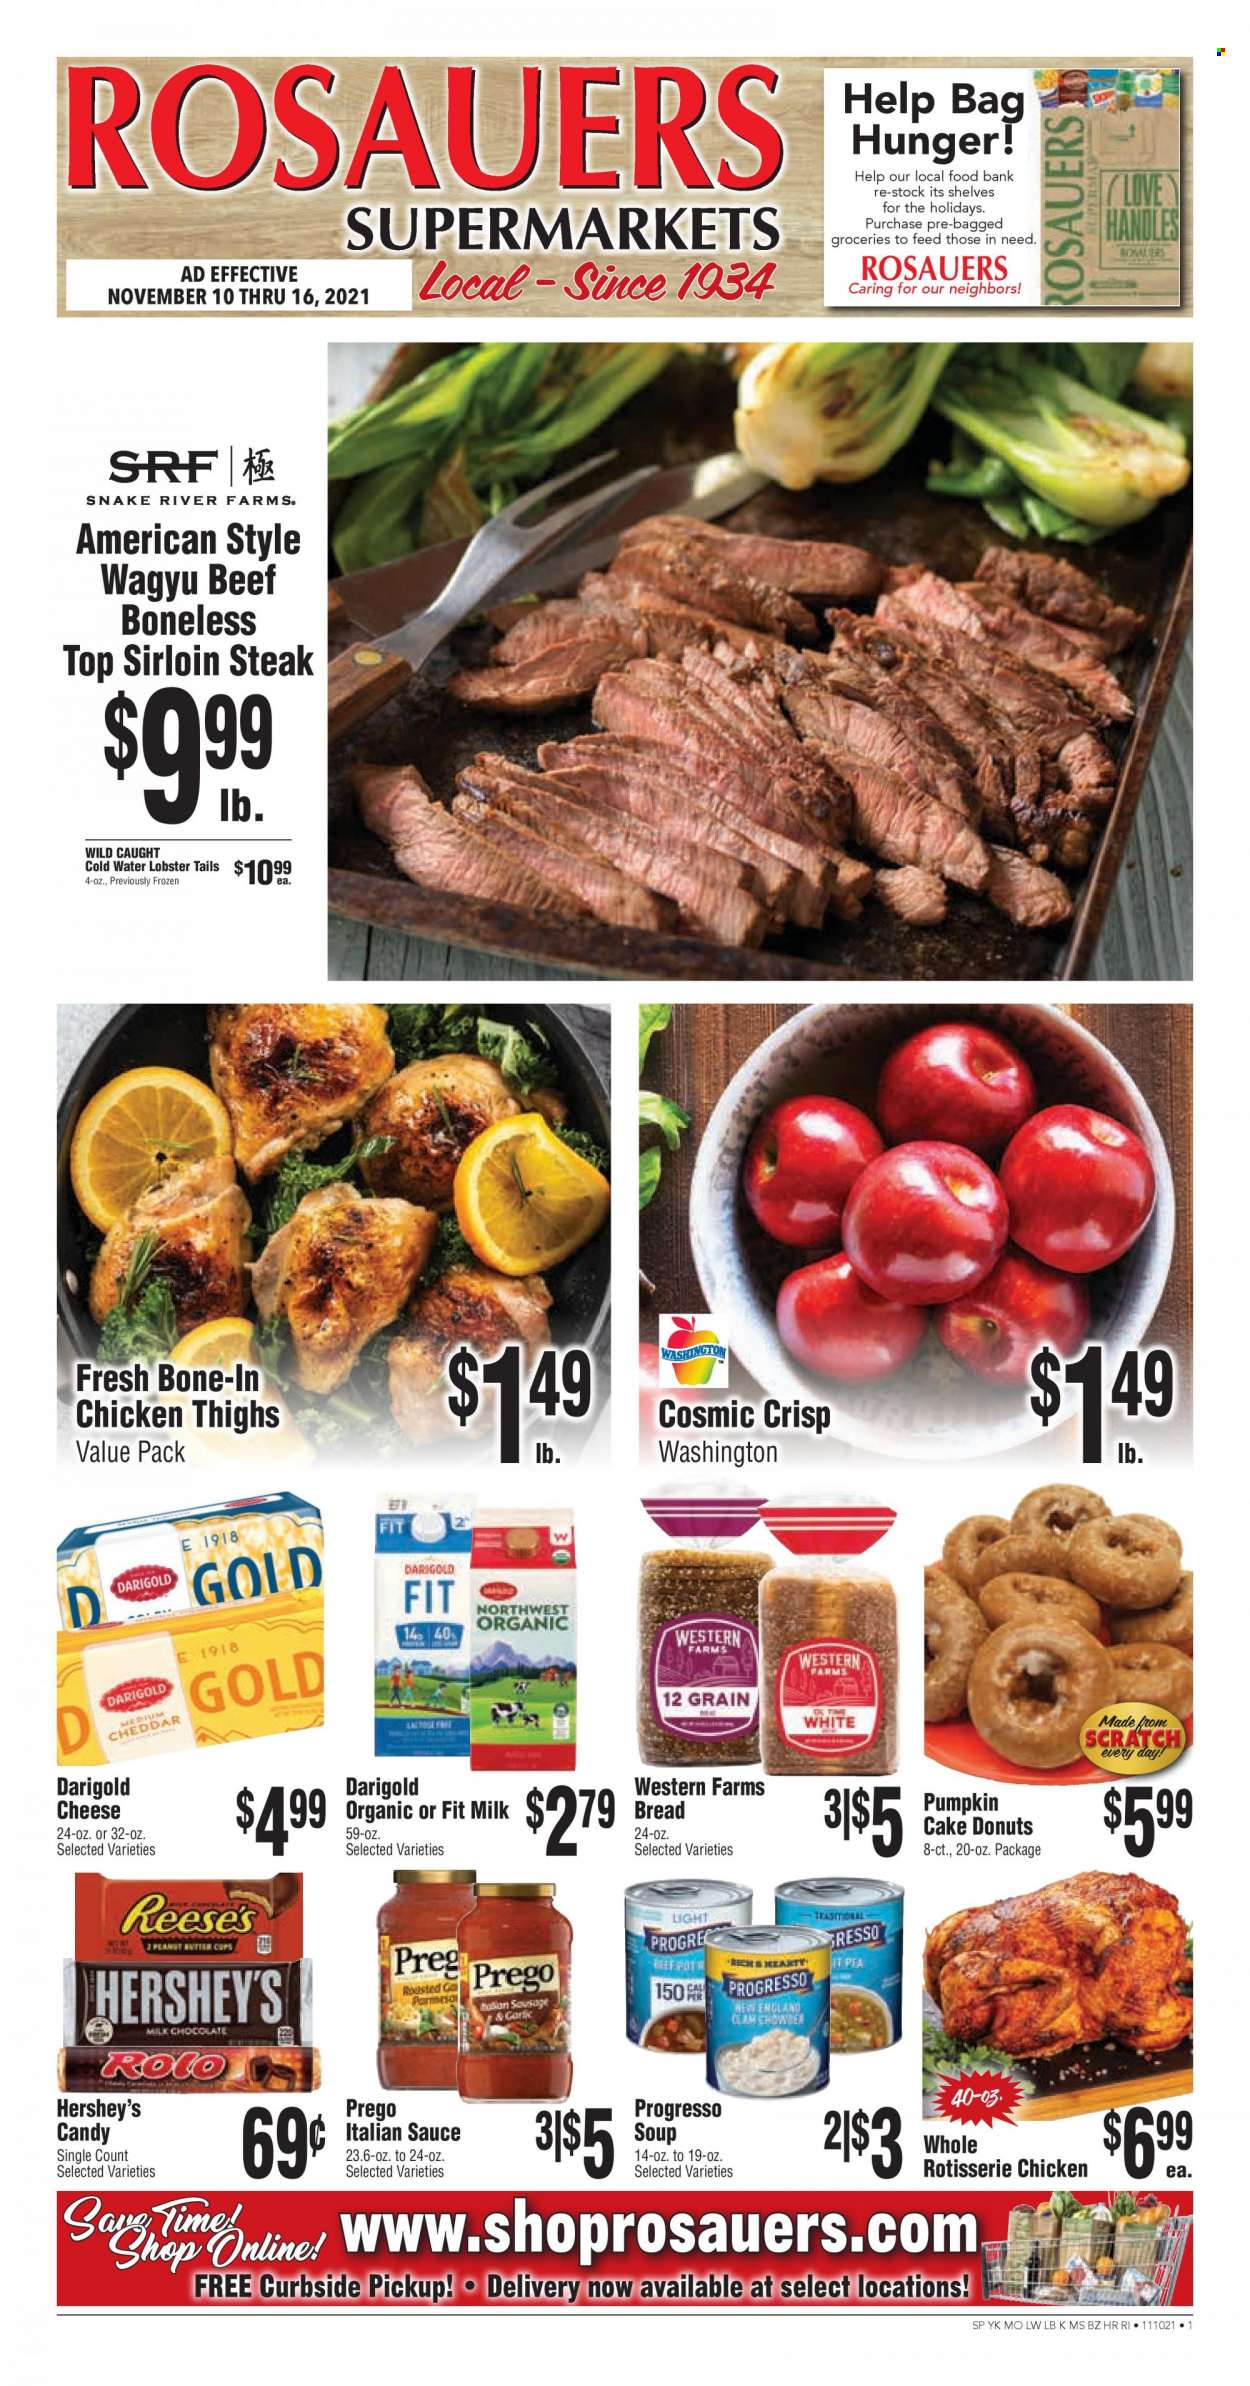 thumbnail - Rosauers Flyer - 11/10/2021 - 11/16/2021 - Sales products - bread, cake, donut, pumpkin, clams, lobster, lobster tail, chicken roast, sauce, Progresso, cheddar, cheese, Reese's, Hershey's, milk chocolate, chocolate, chicken thighs, beef sirloin, steak, sirloin steak, bag. Page 1.